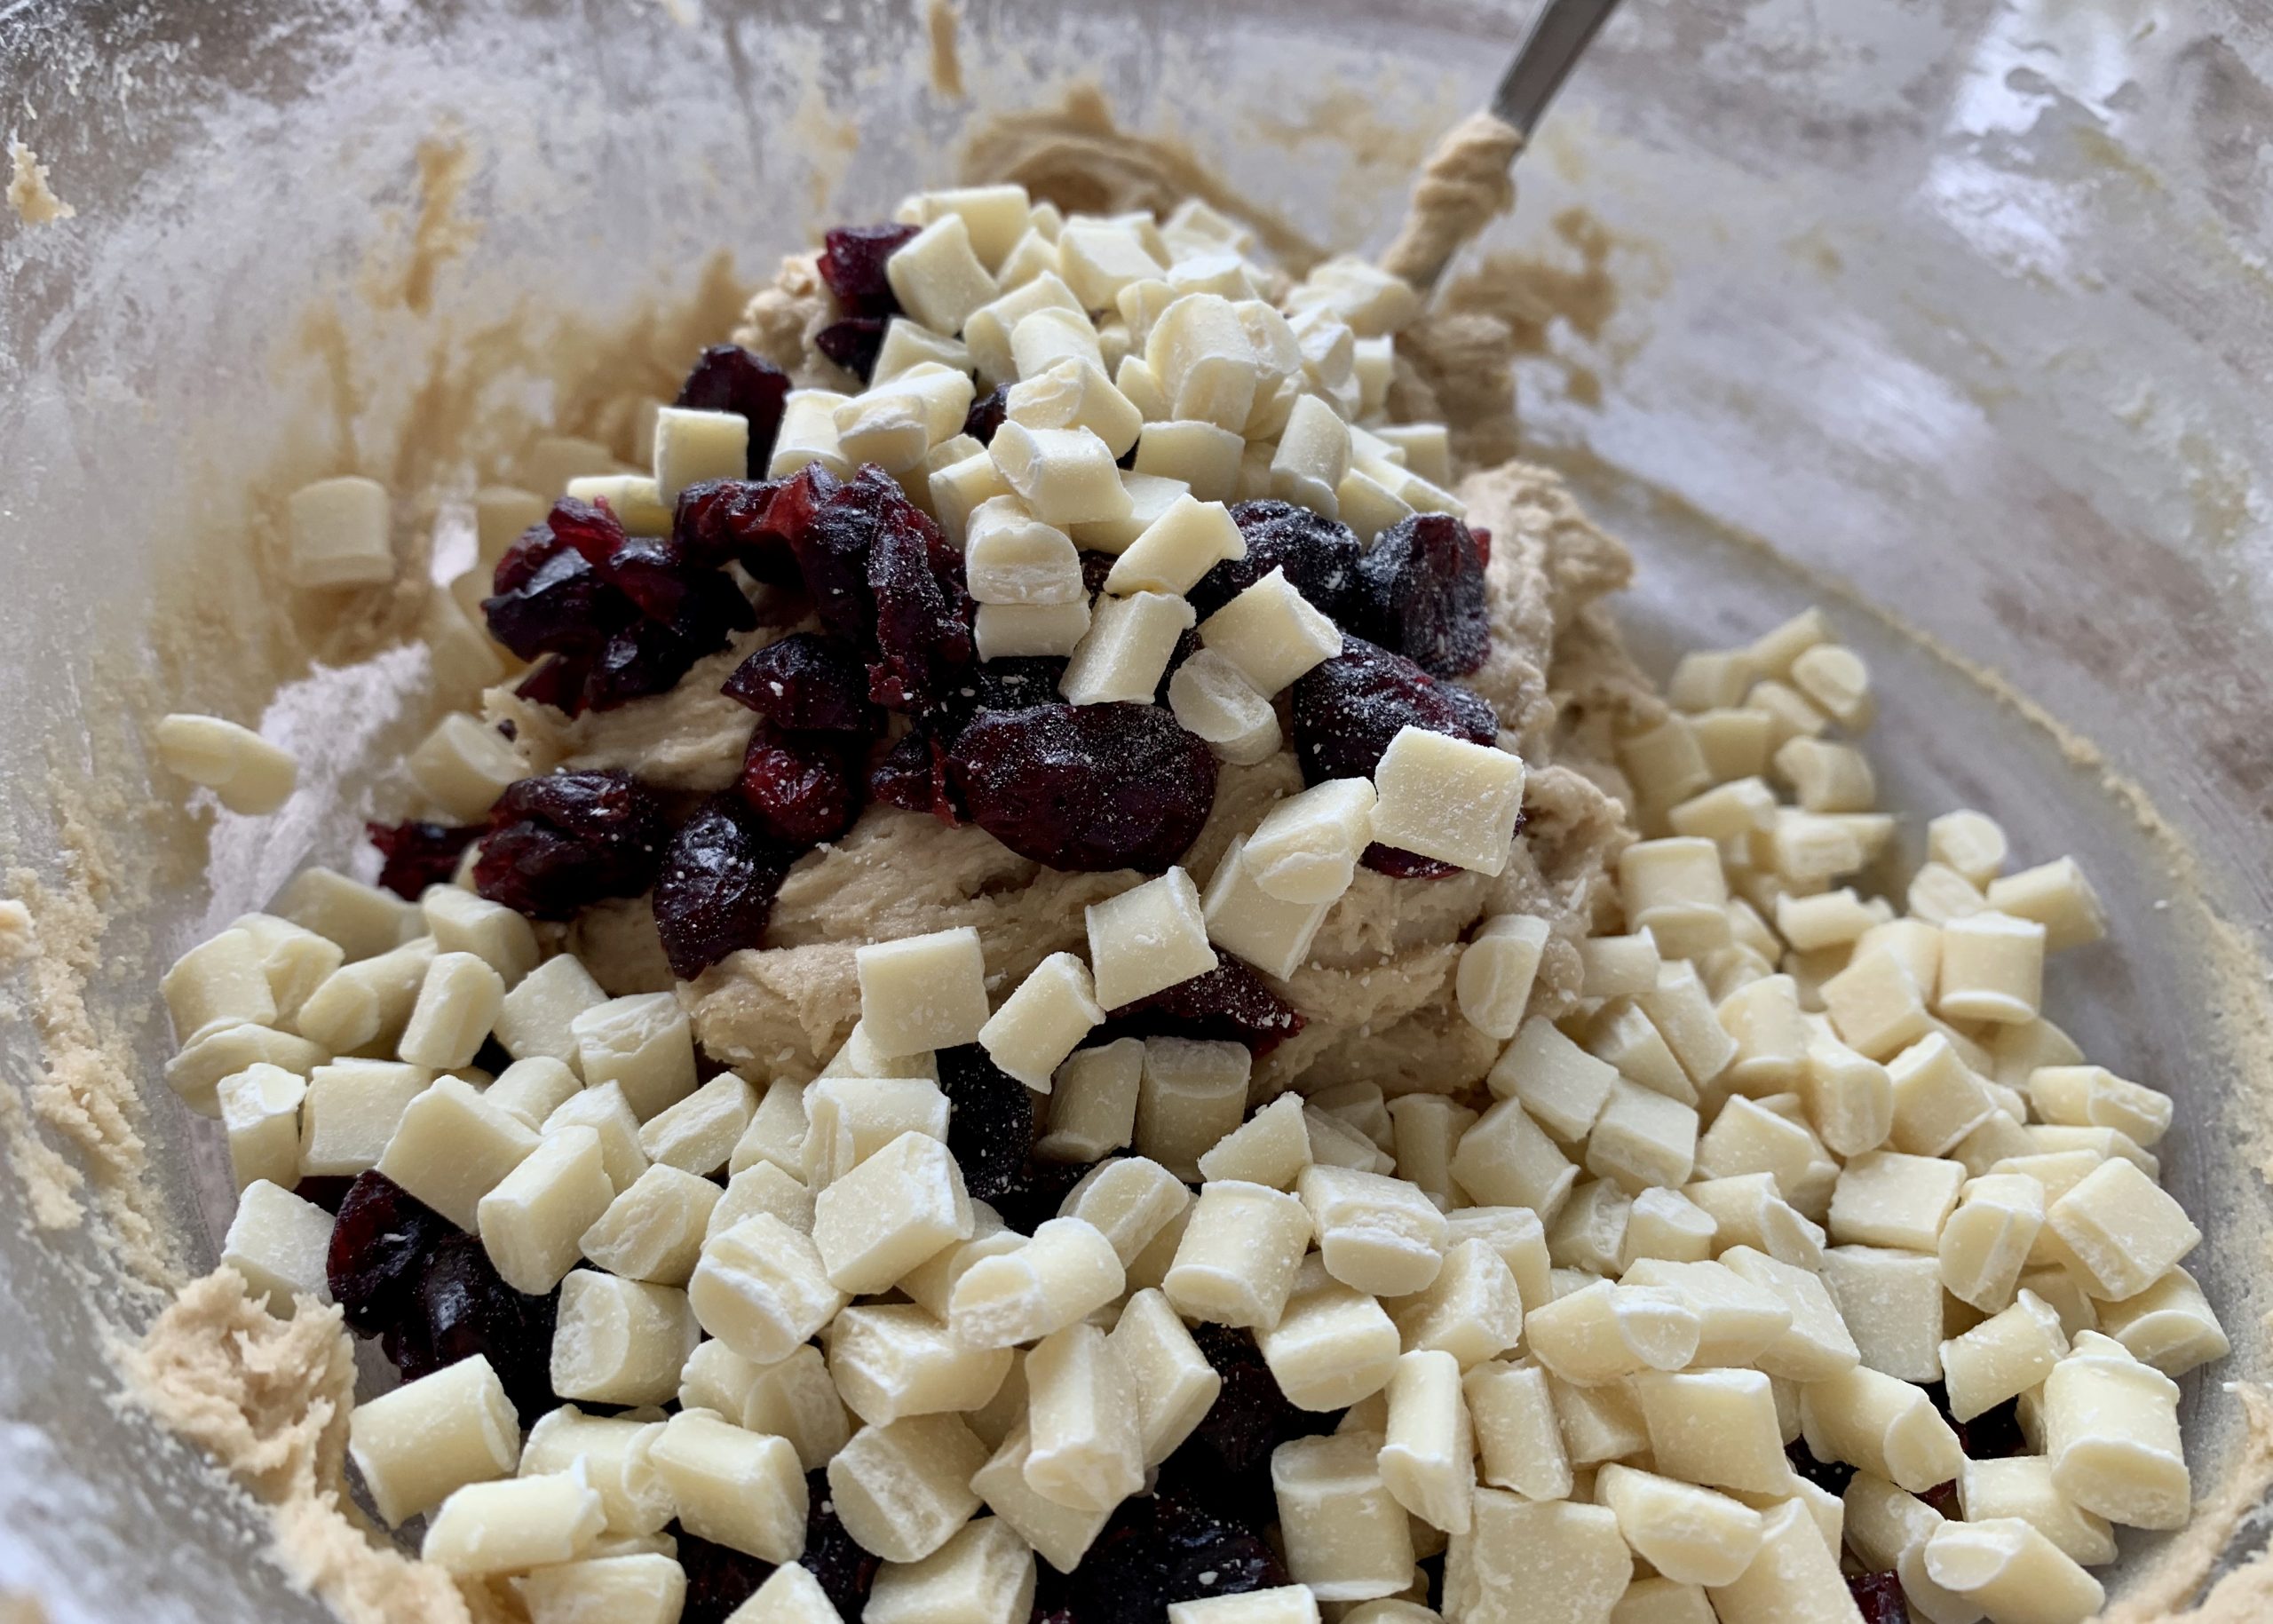 Gluten free cookie dough mixture with white chocolate chunks and cranberries added